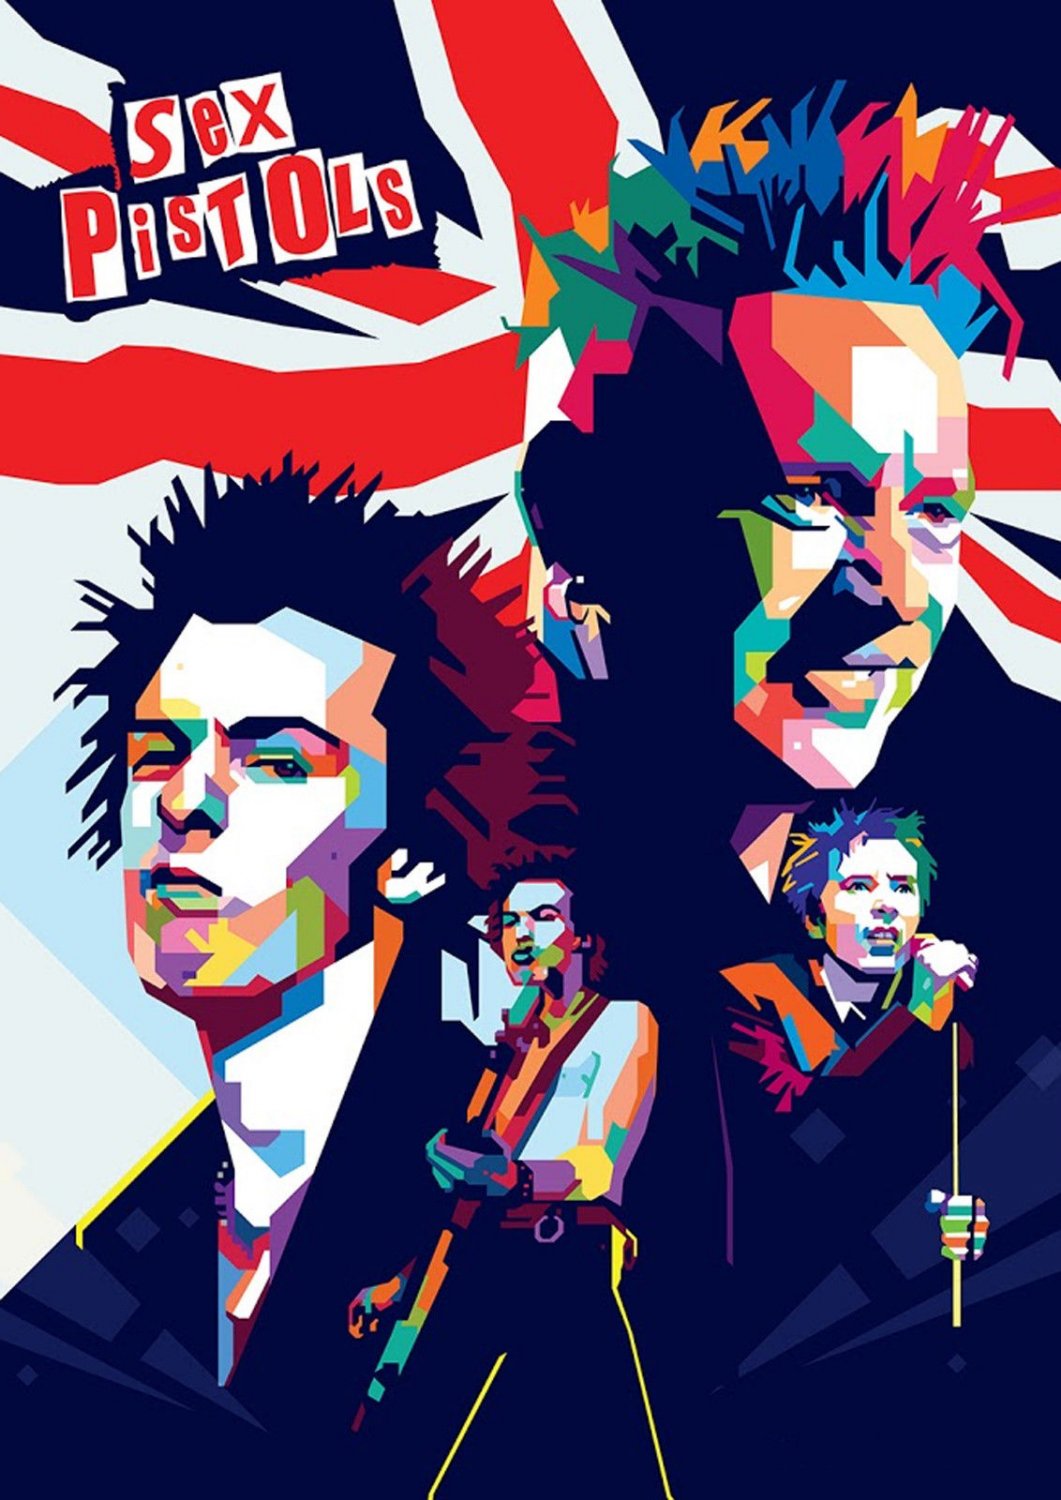 Art print POSTER Sid Vicious and Johnny Rotten wpap 8.3x11.7 inches.